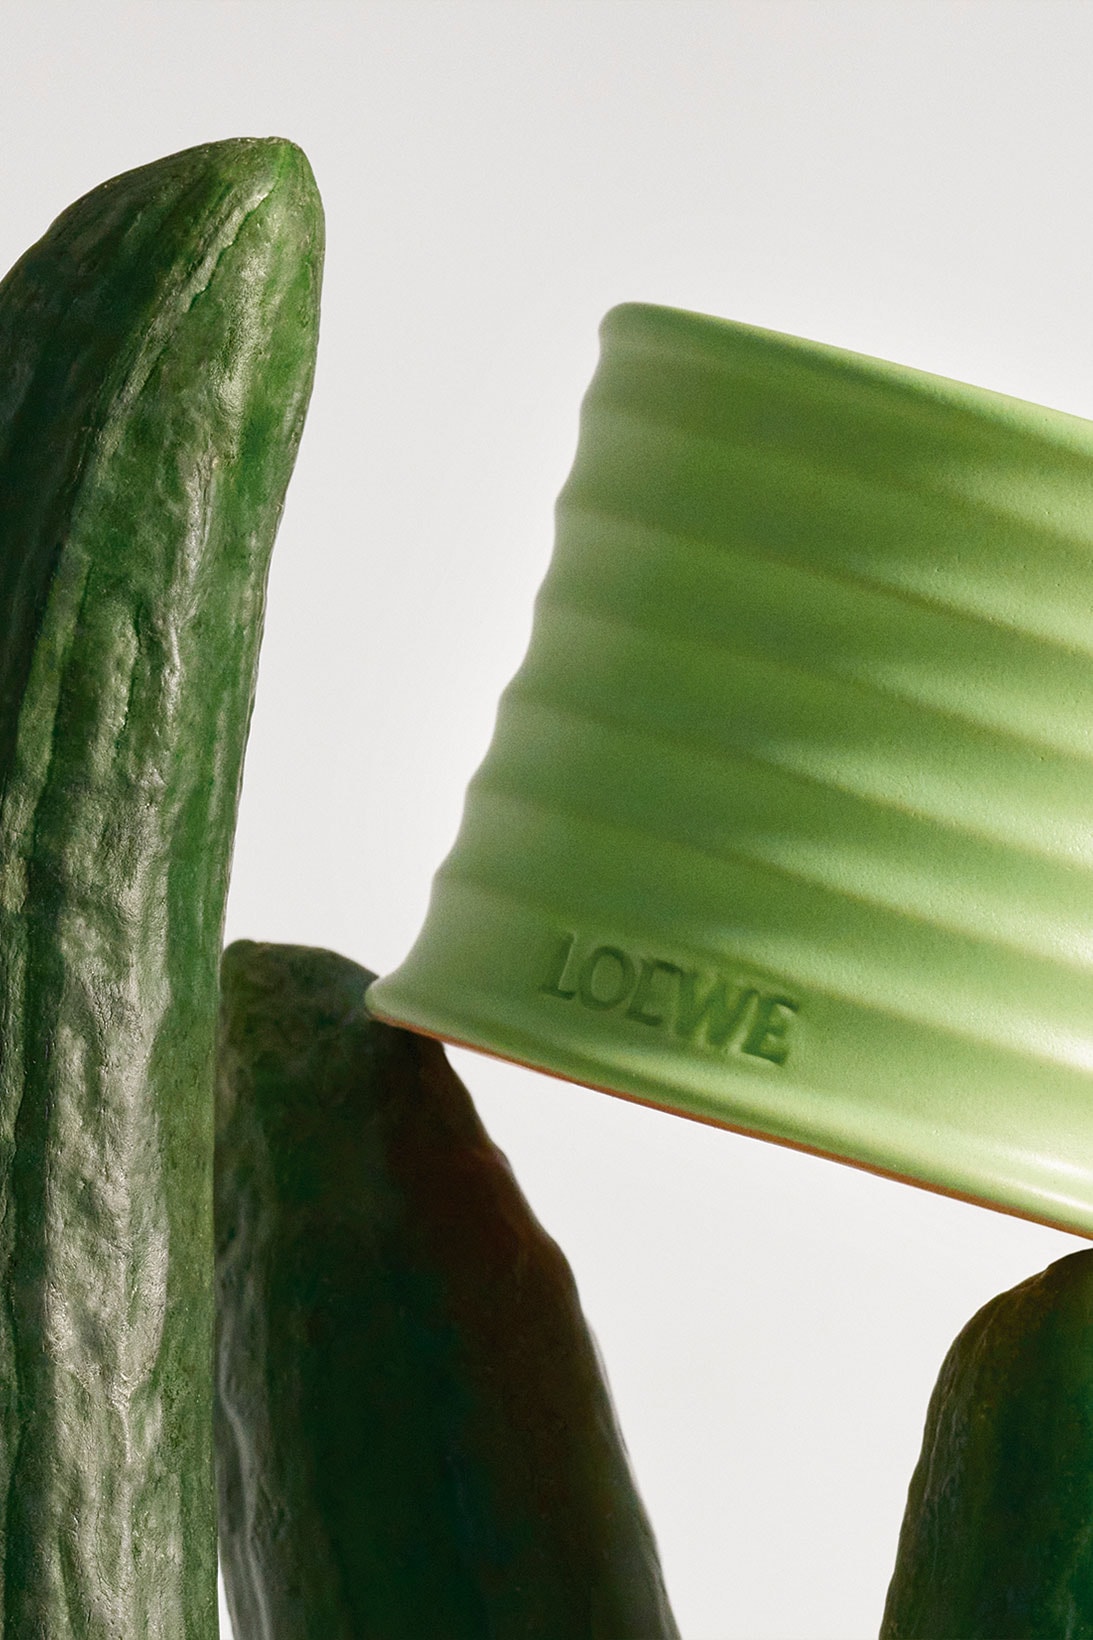 Loewe Candle Cucumber Scent Home Fragrance Release Info